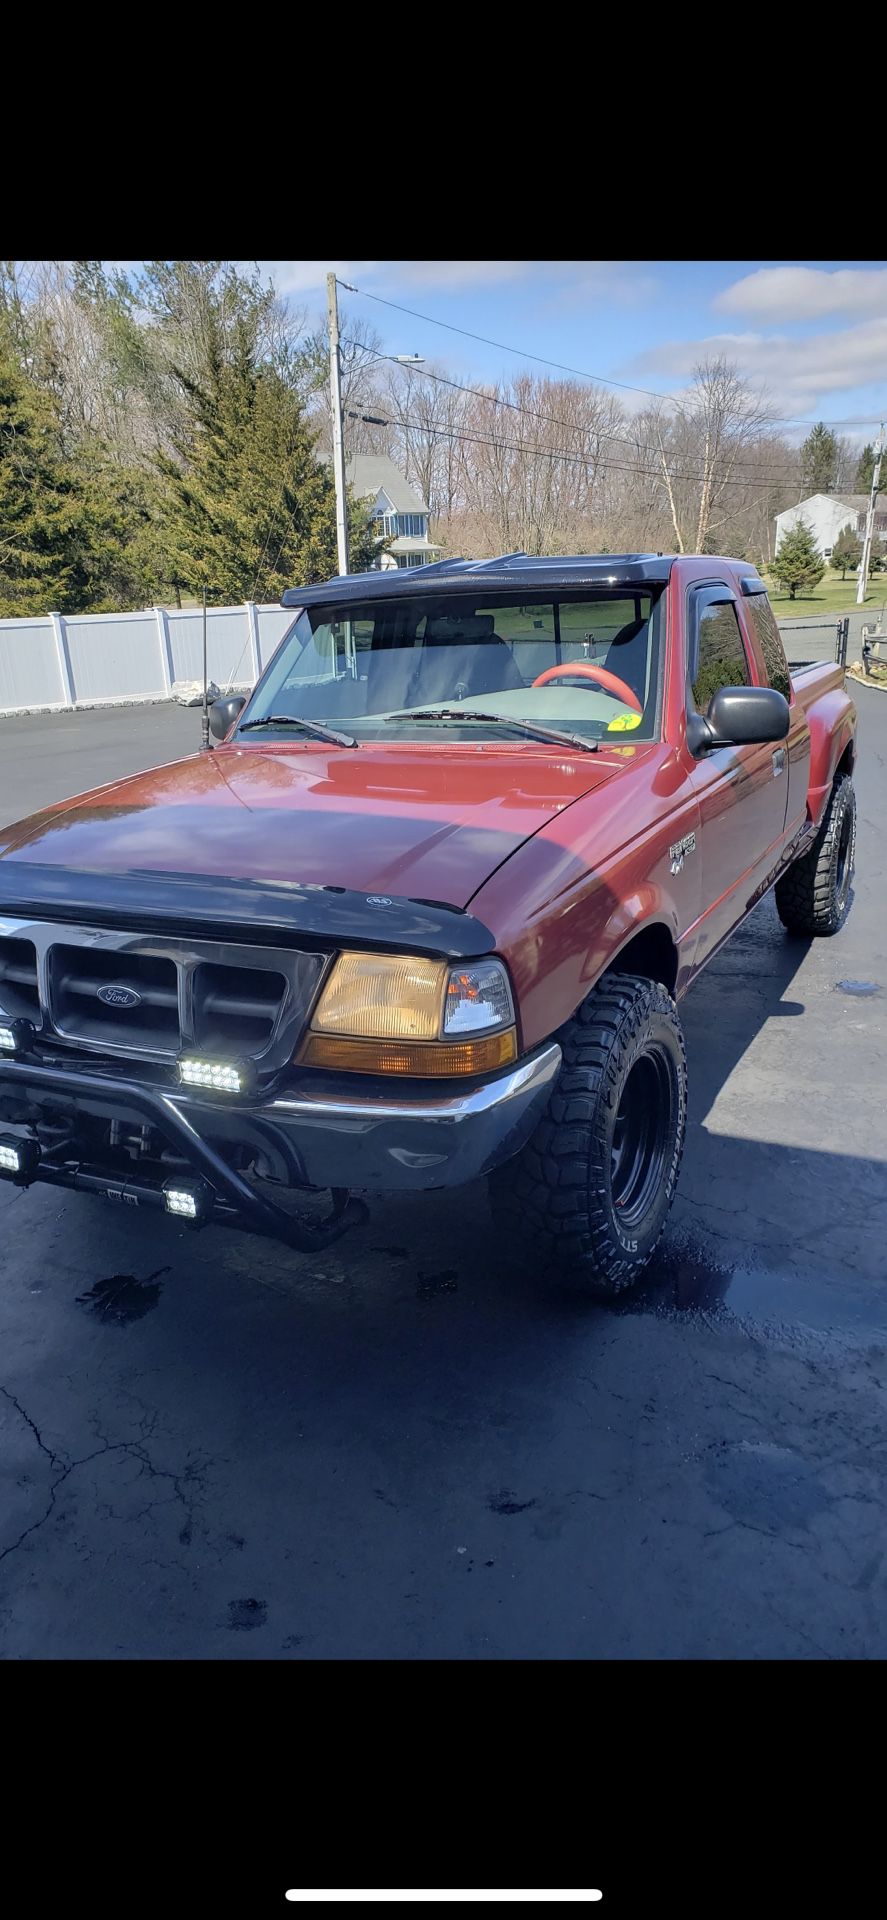 99 ford ranger step side good cond no rot on body clean a/c ice cold new shocks brakes and few other parts runs good has 170 k